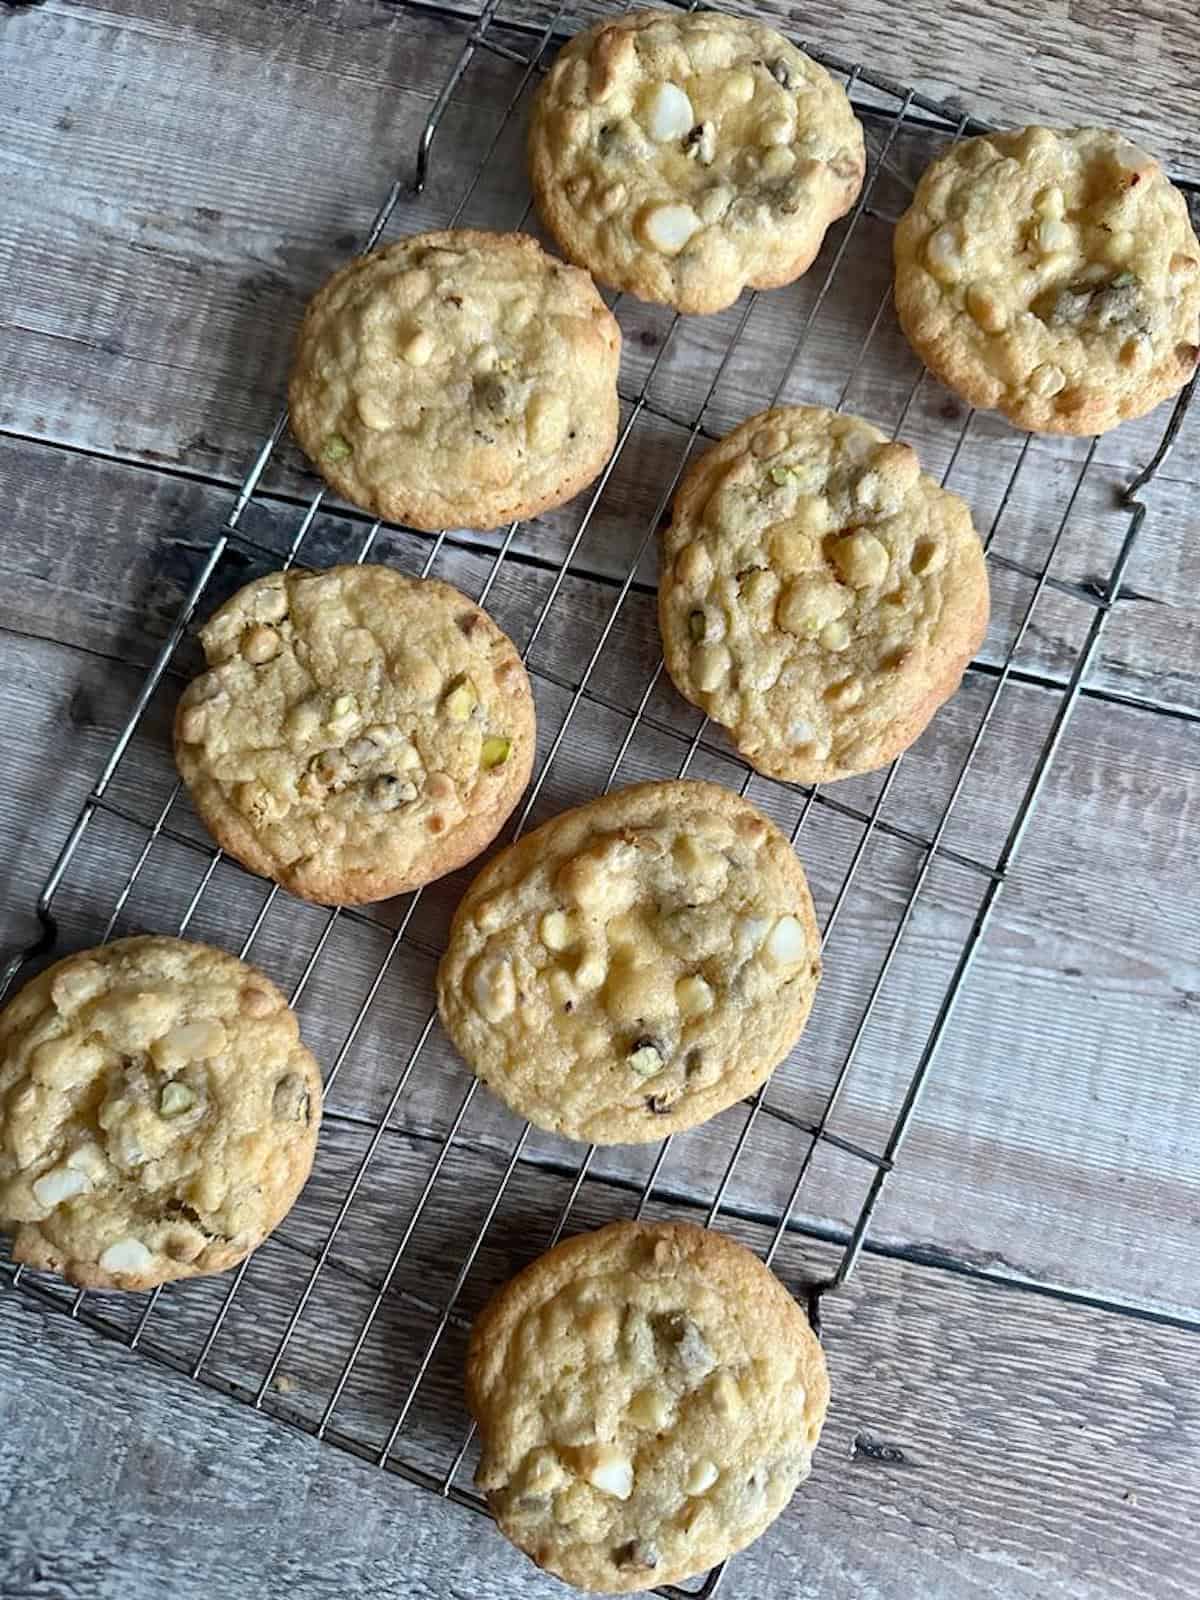 Freshly baked pistachio, white chocolate and macadamia nut cookies on a cooling rack. 